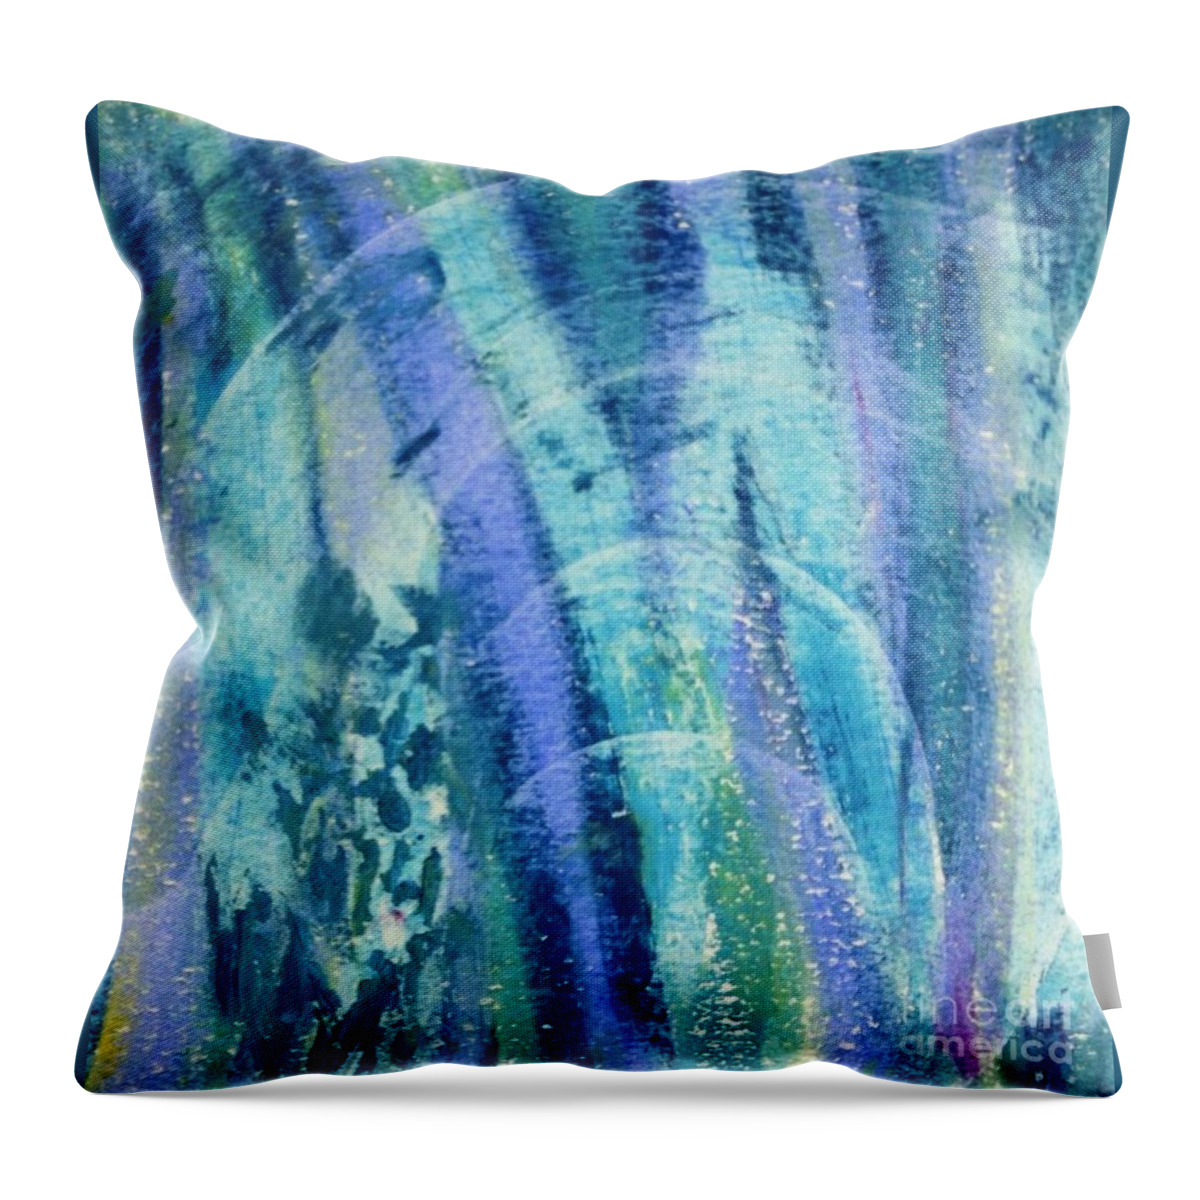 Northern Lights Throw Pillow featuring the painting Northern Lights by Deb Stroh-Larson